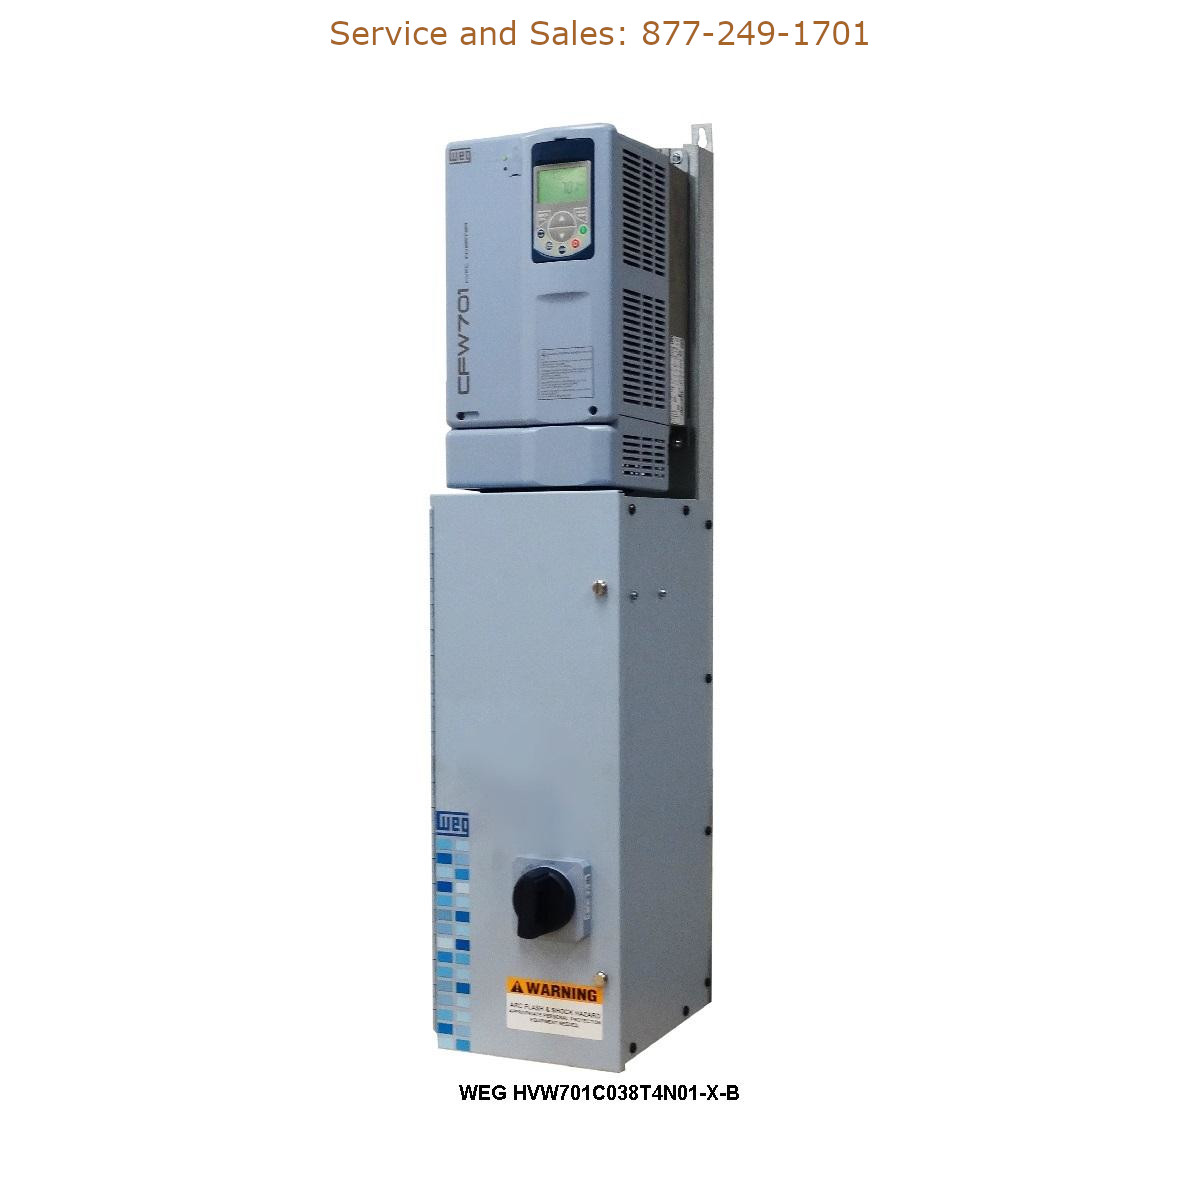 WEG HVW701C038T4N01-X-B WEG Model Number HVW701C038T4N01-X-B WEG Drives, Variable Speed Drives Repair Service, Troubleshooting, Replacement Parts https://gesrepair.com/wp-content/uploads/2022/WEG/WEG_HVW701C038T4N01-X-B_Drives_Variable_Speed_Drives.jpg